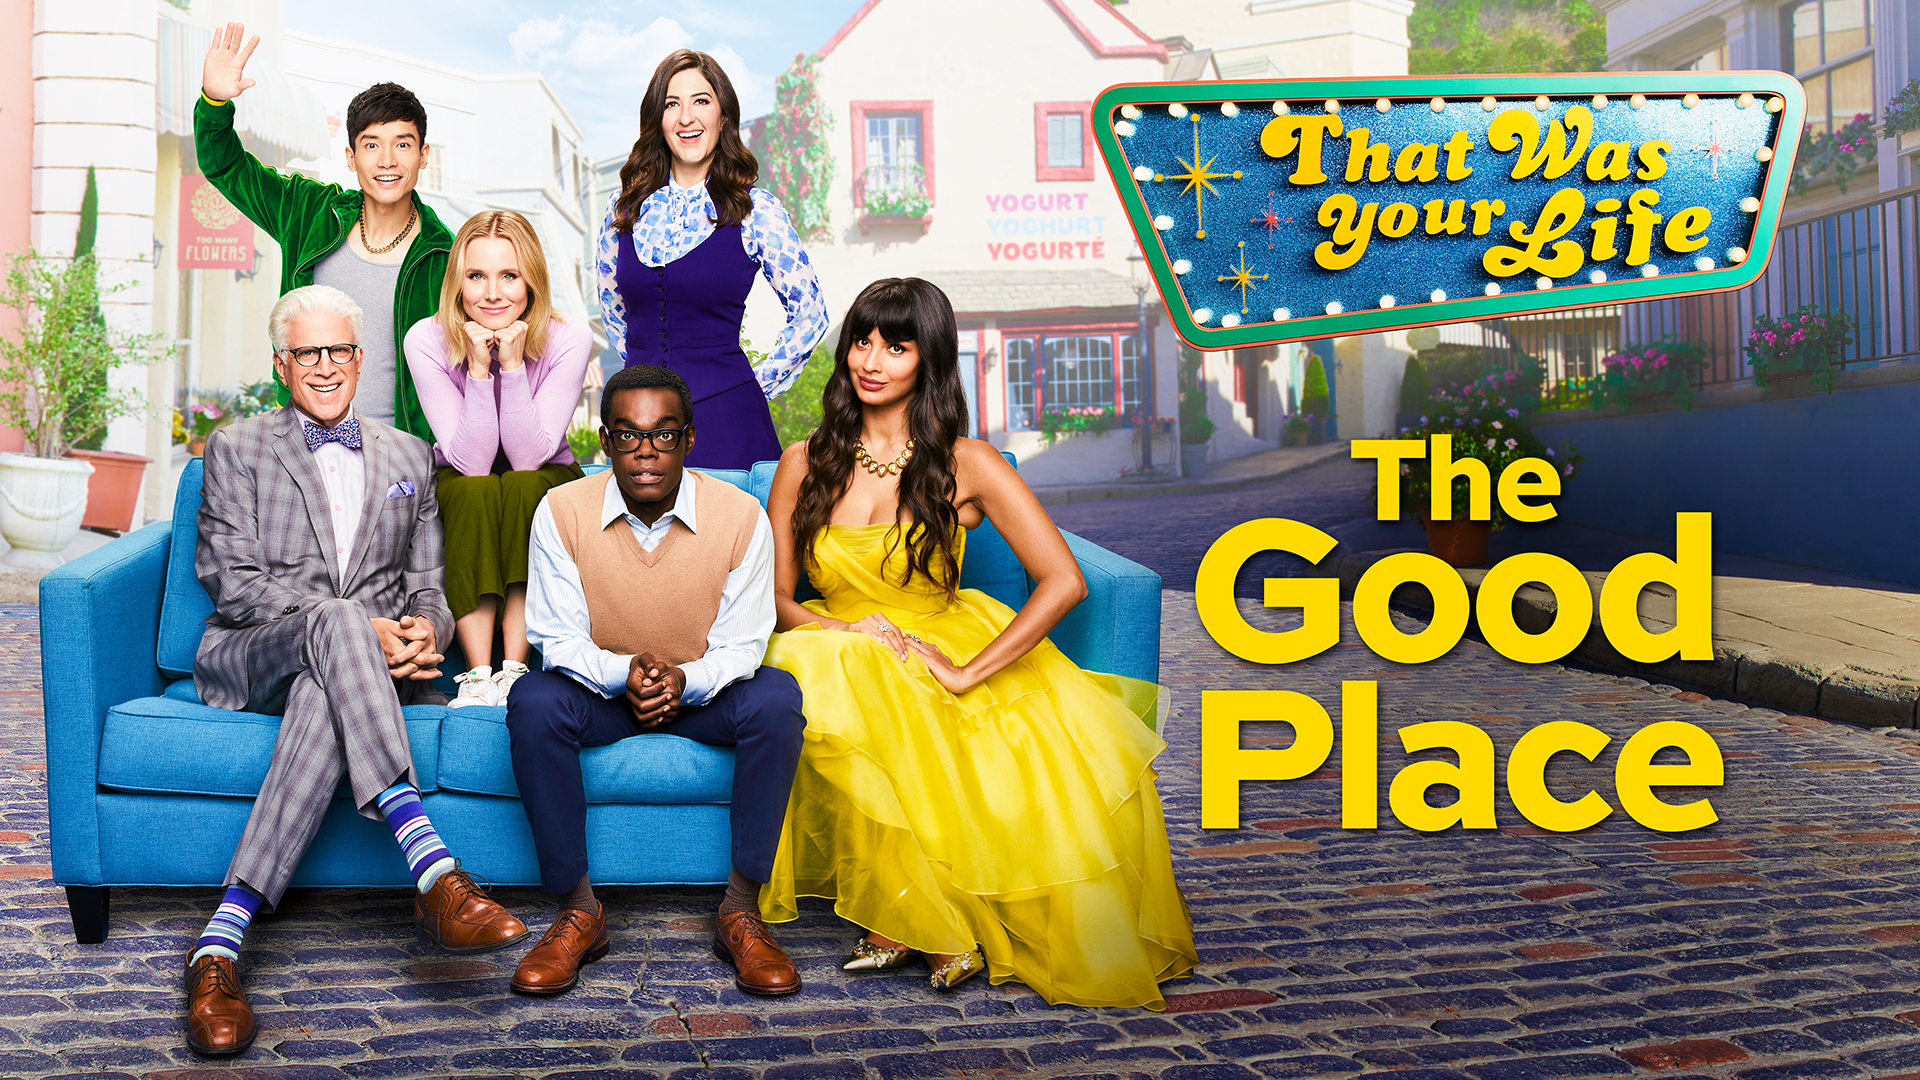 Watch The Good Place Episodes at NBC.com